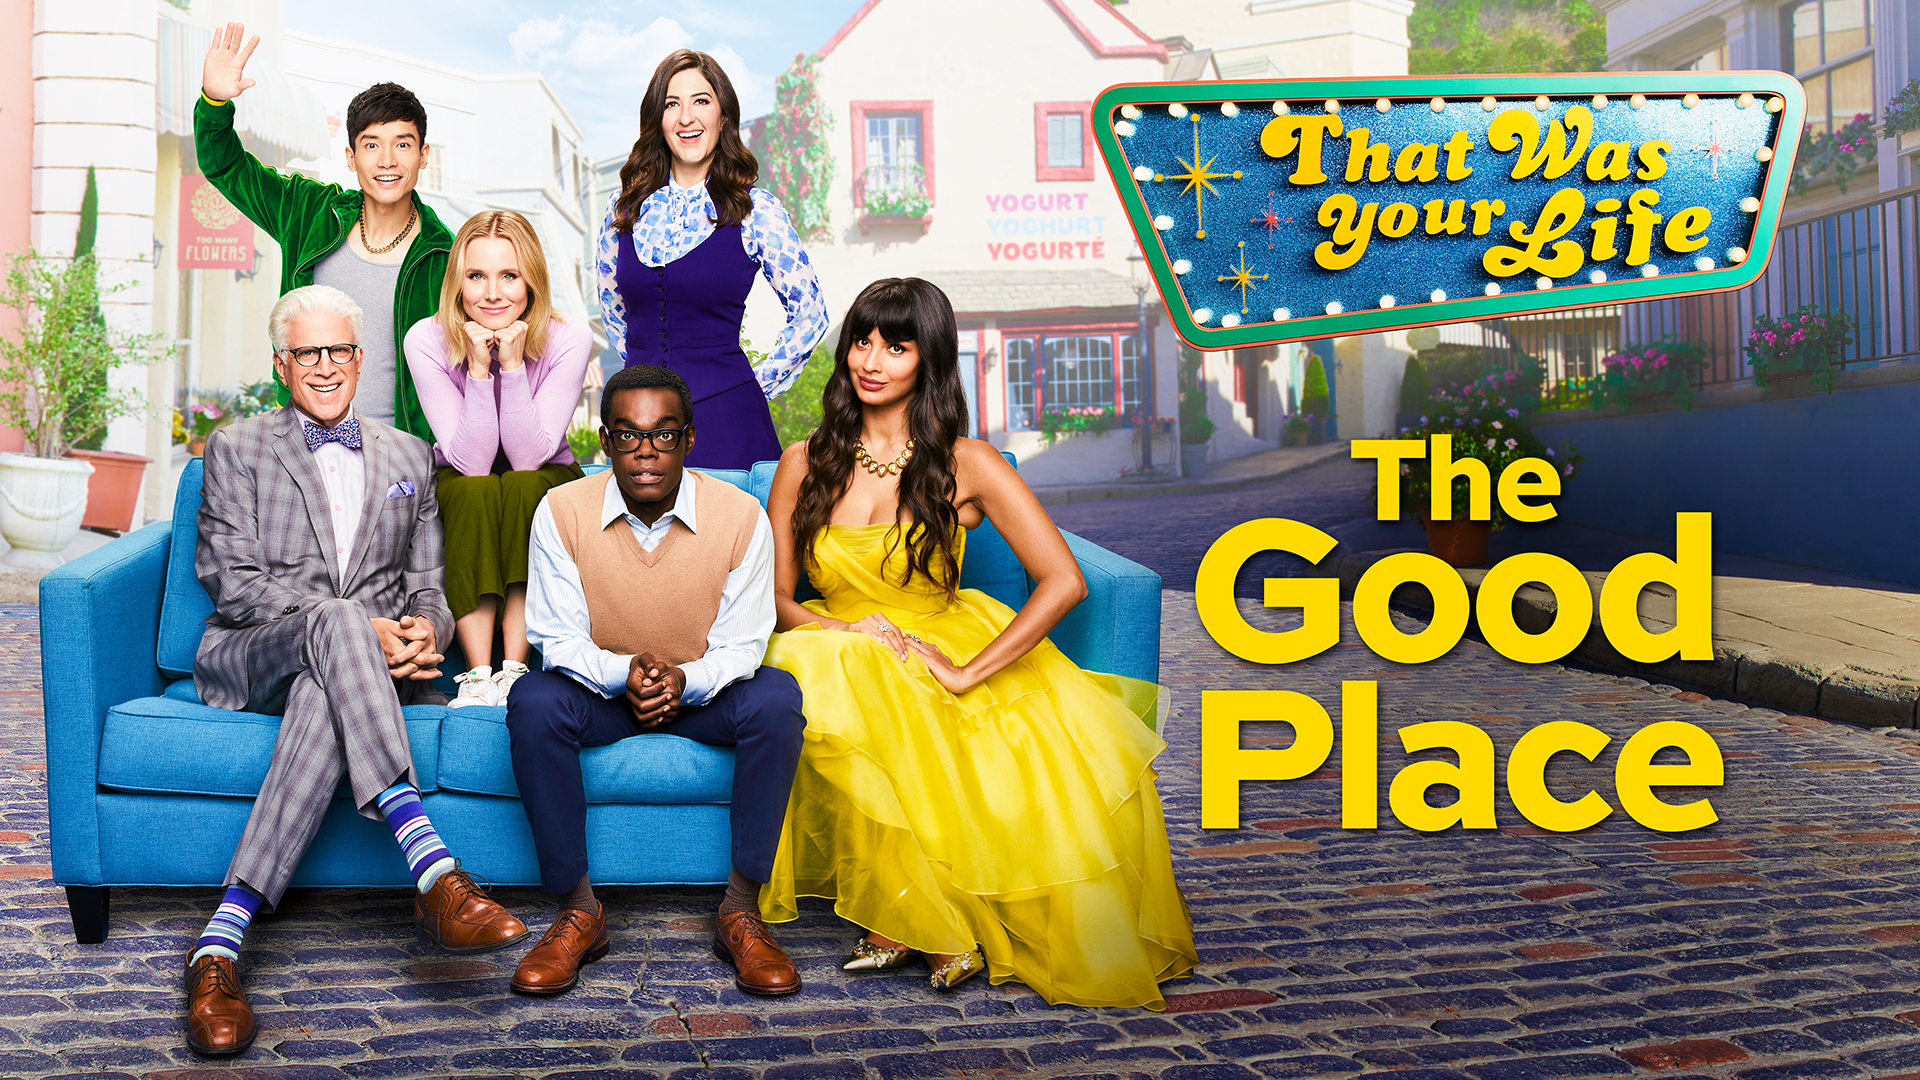 Watch The Good Place Episodes at NBC.com